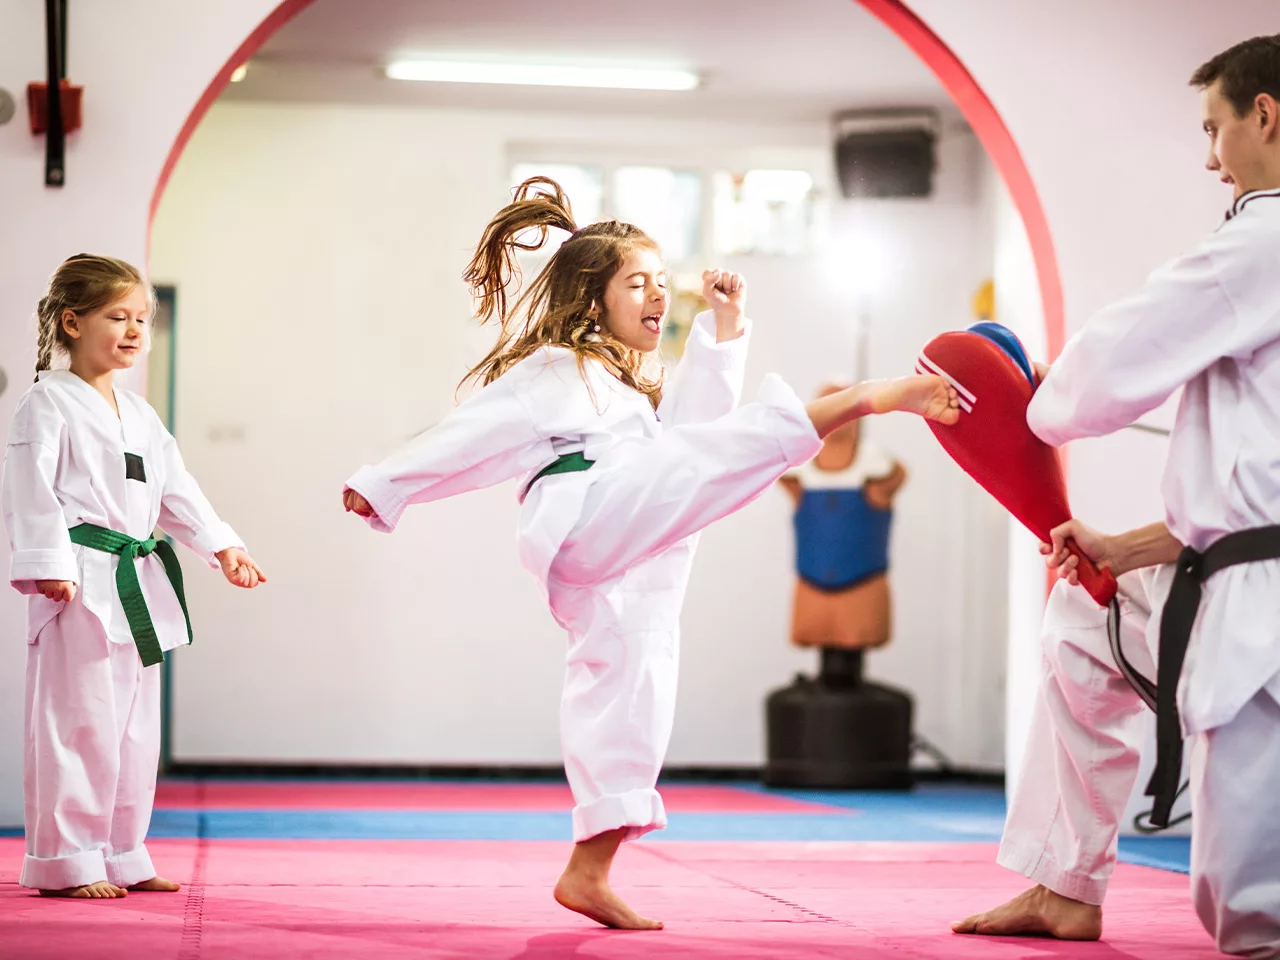 A child wearing a martial arts uniform performs a kick. Her instructor is holding a red foam board.